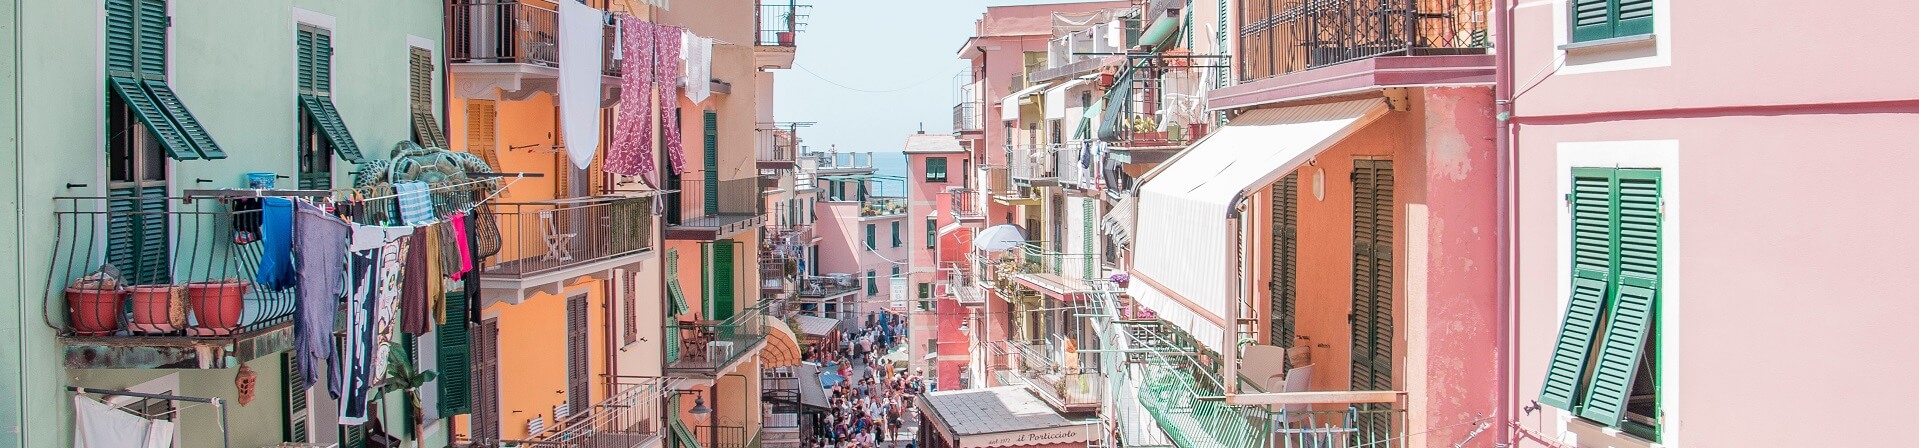 Is it better to stay in Cinque Terre or do a day trip?